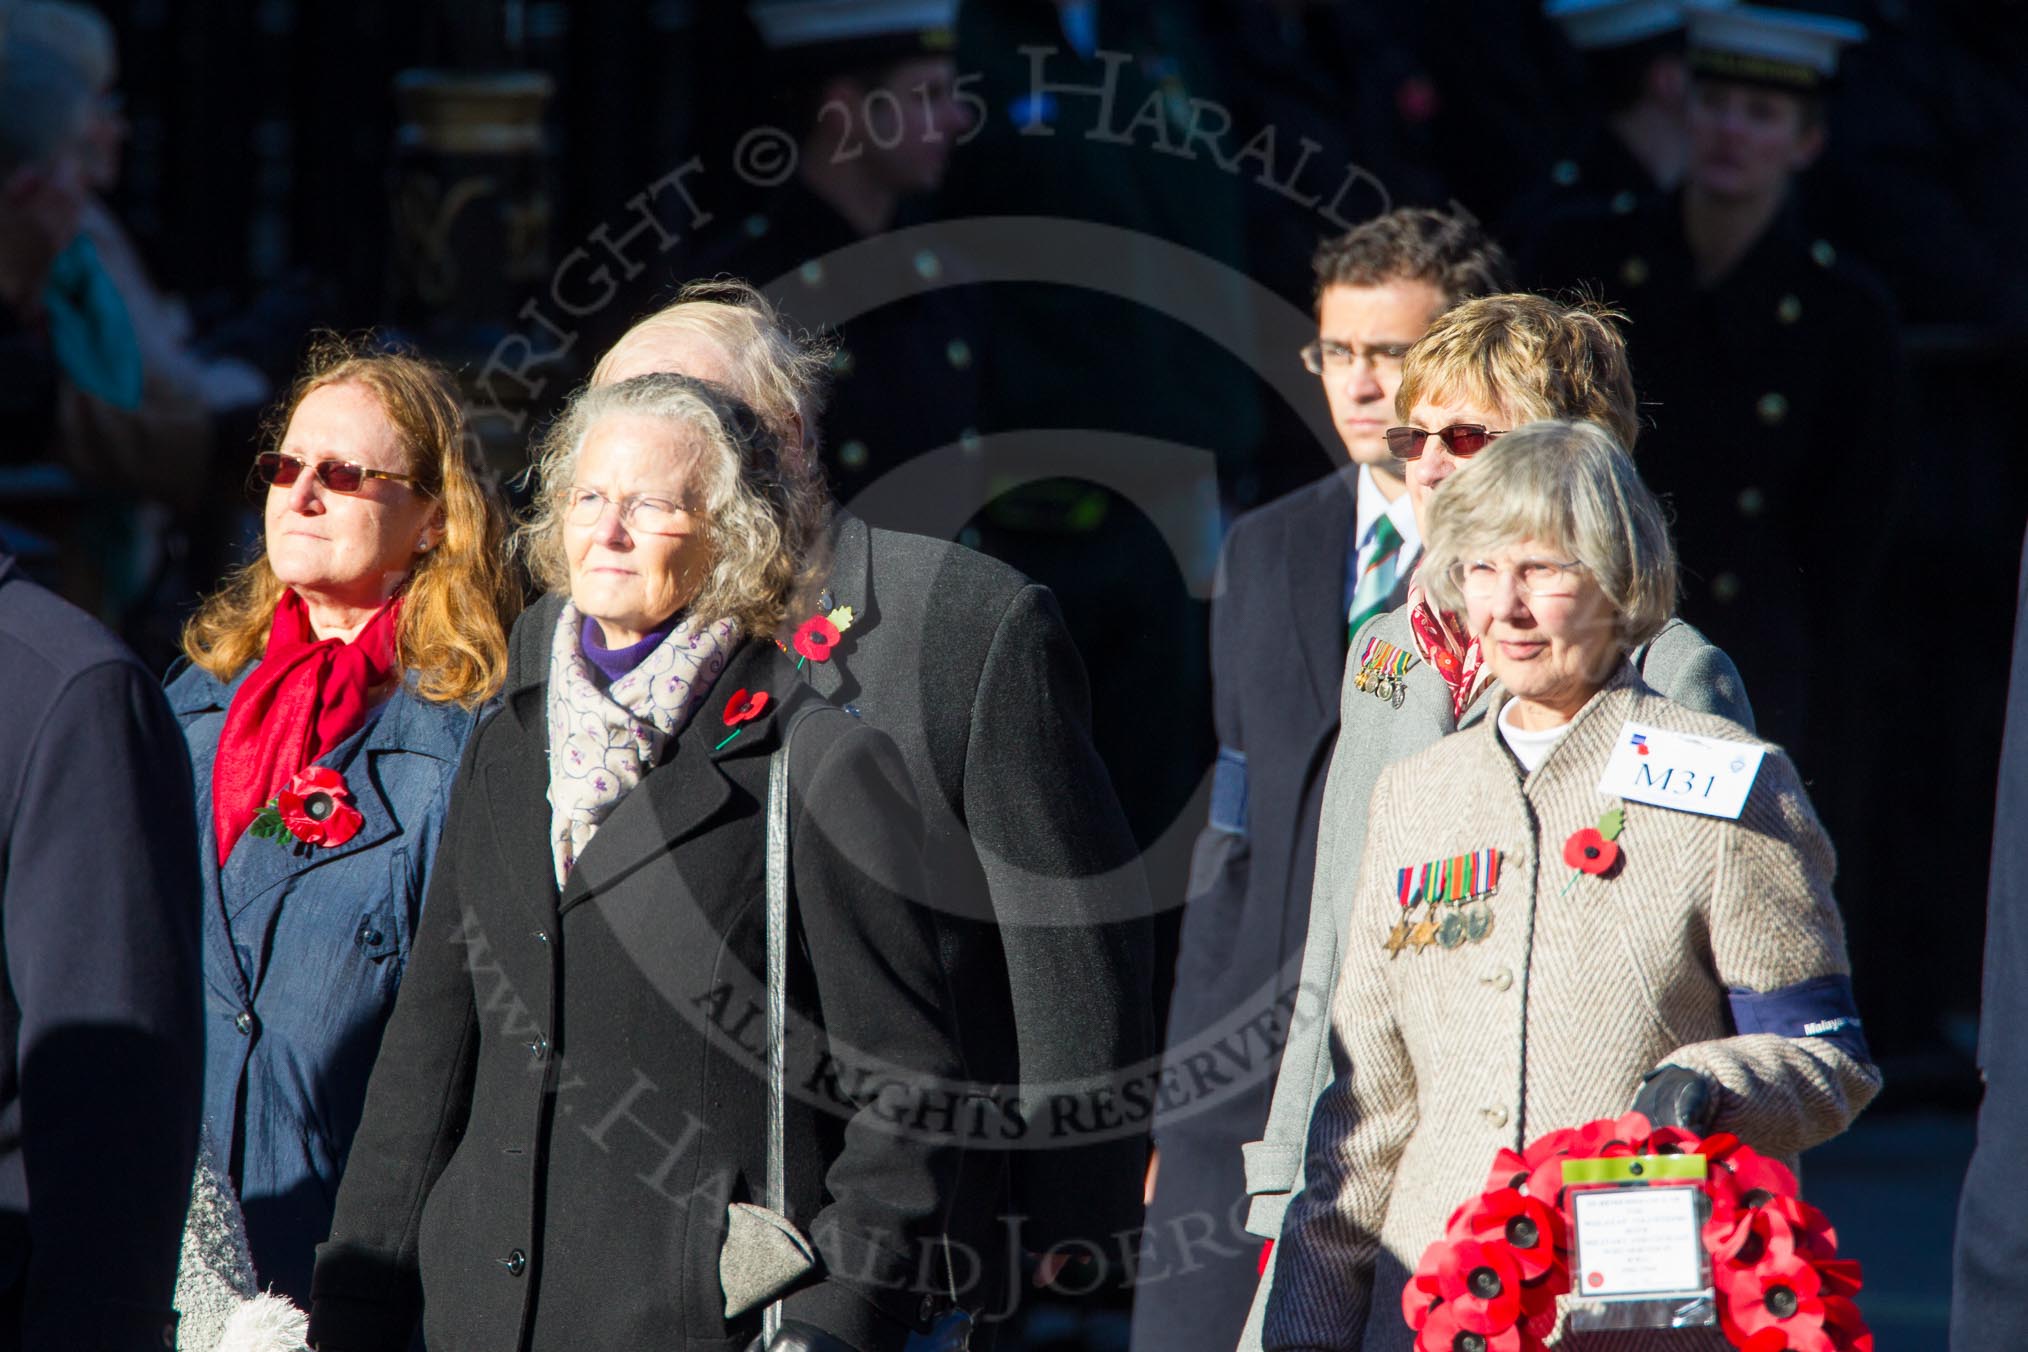 Remembrance Sunday Cenotaph March Past 2013: M31 - Malayan Volunteers Group..
Press stand opposite the Foreign Office building, Whitehall, London SW1,
London,
Greater London,
United Kingdom,
on 10 November 2013 at 12:12, image #2111